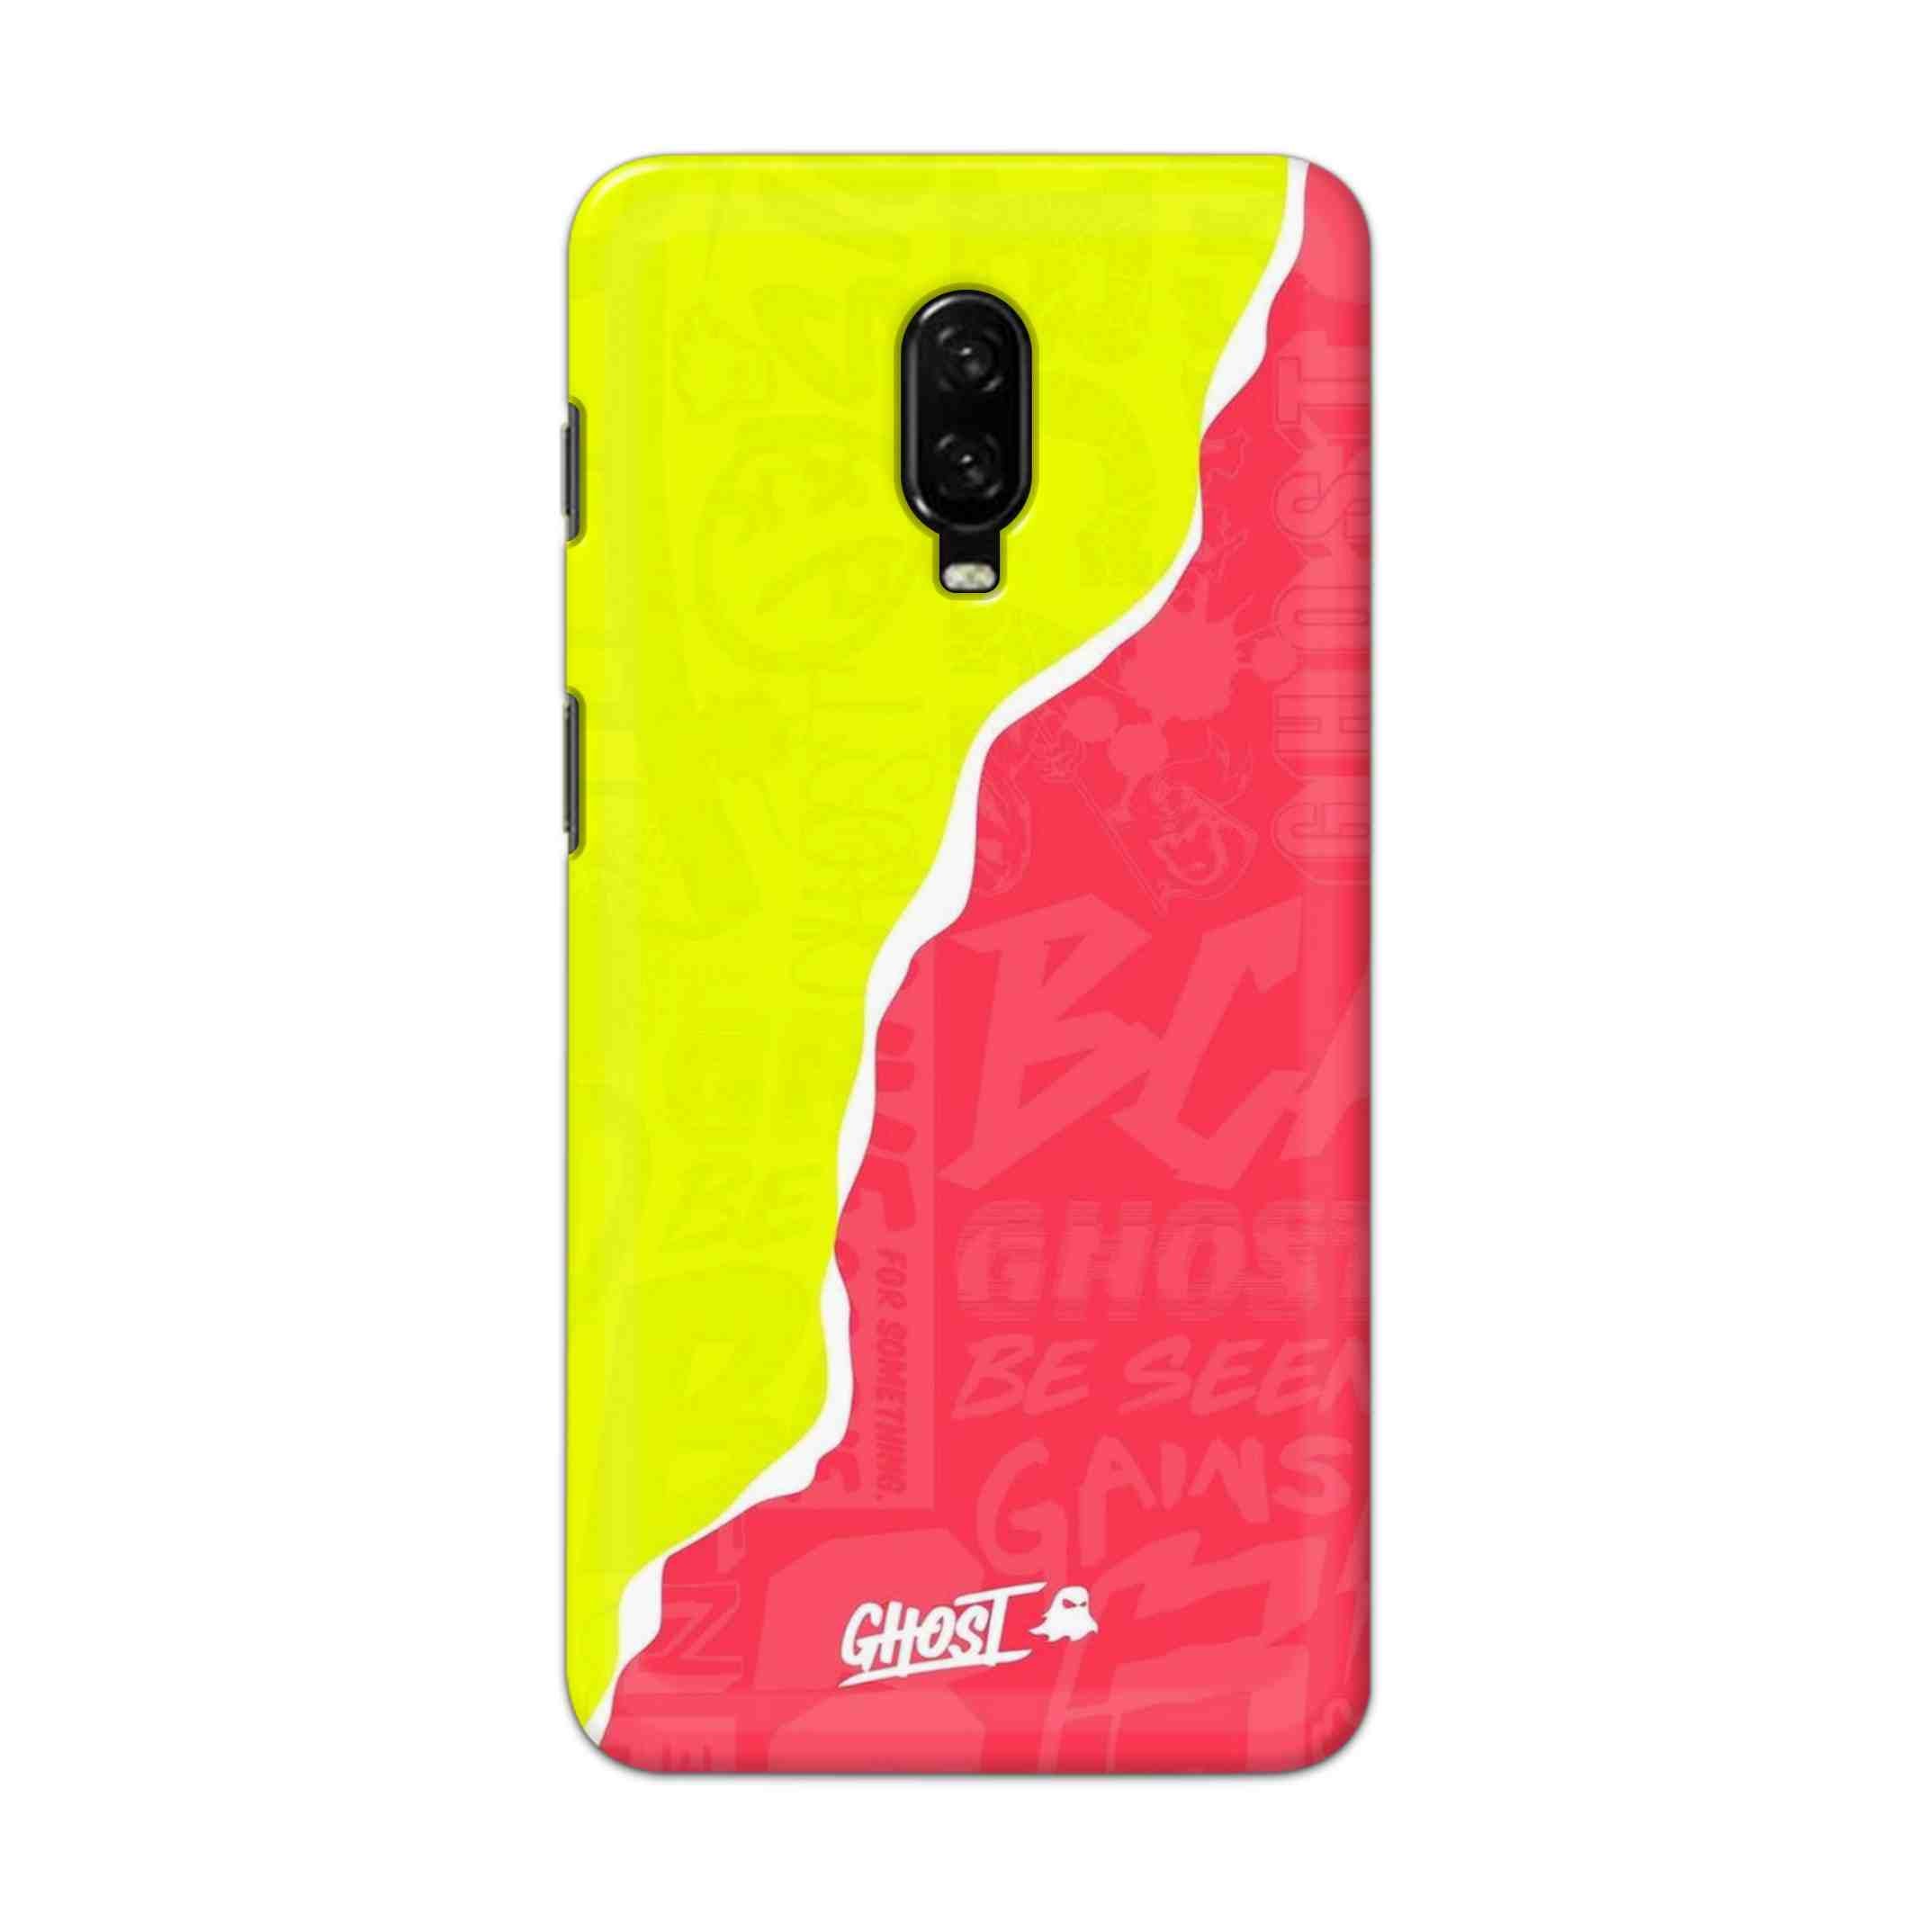 Buy Ghost Hard Back Mobile Phone Case Cover For OnePlus 6T Online